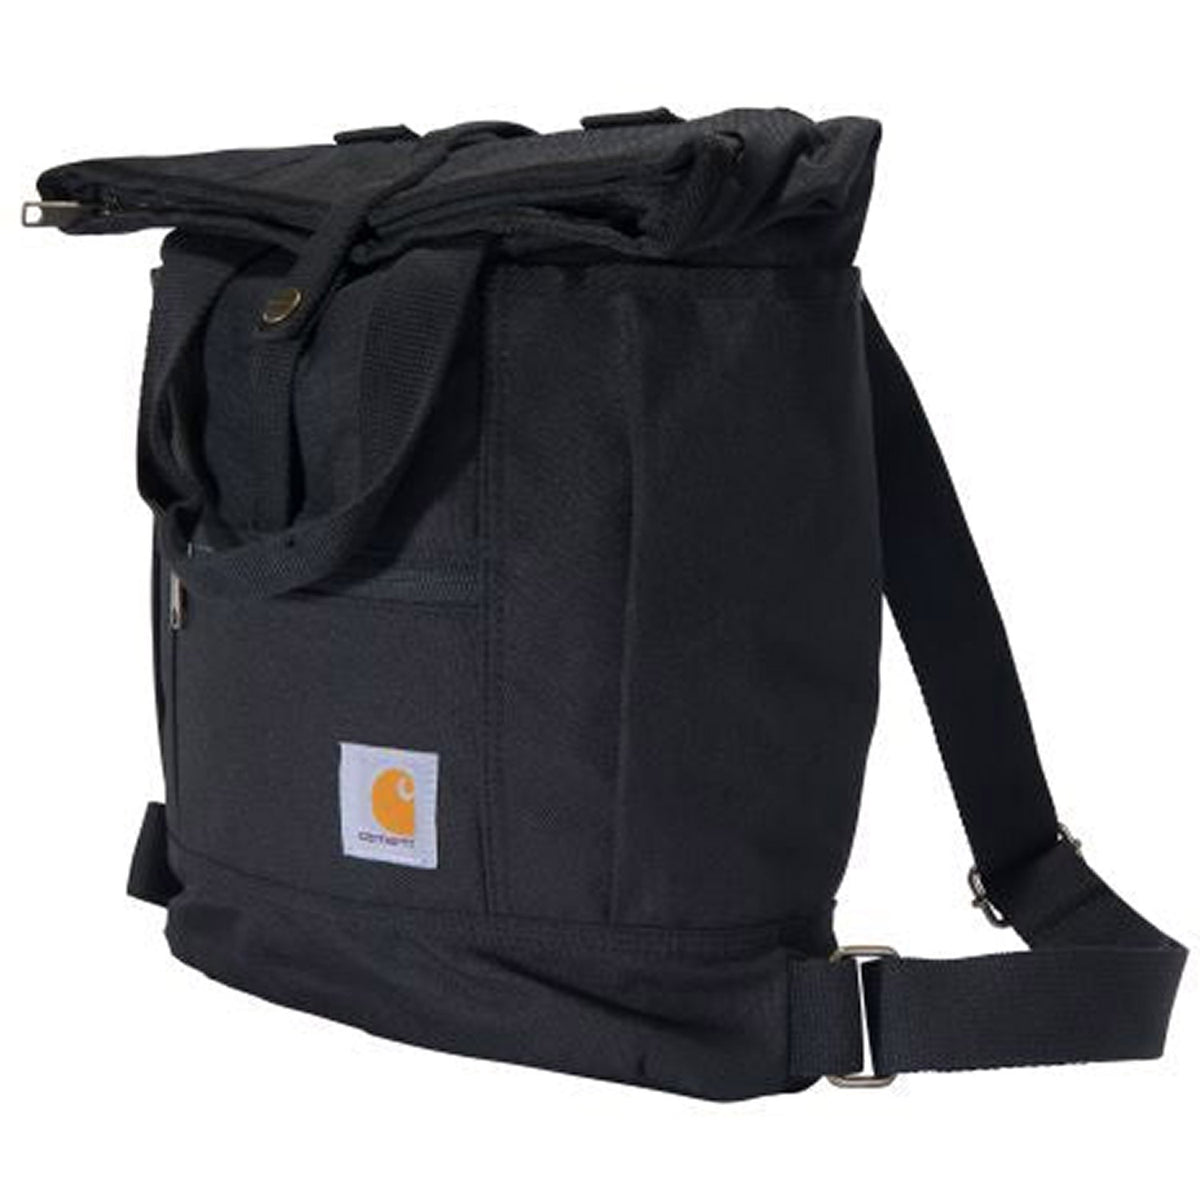 Carhartt Convertible Backpack Tote - Work World - Workwear, Work Boots, Safety Gear